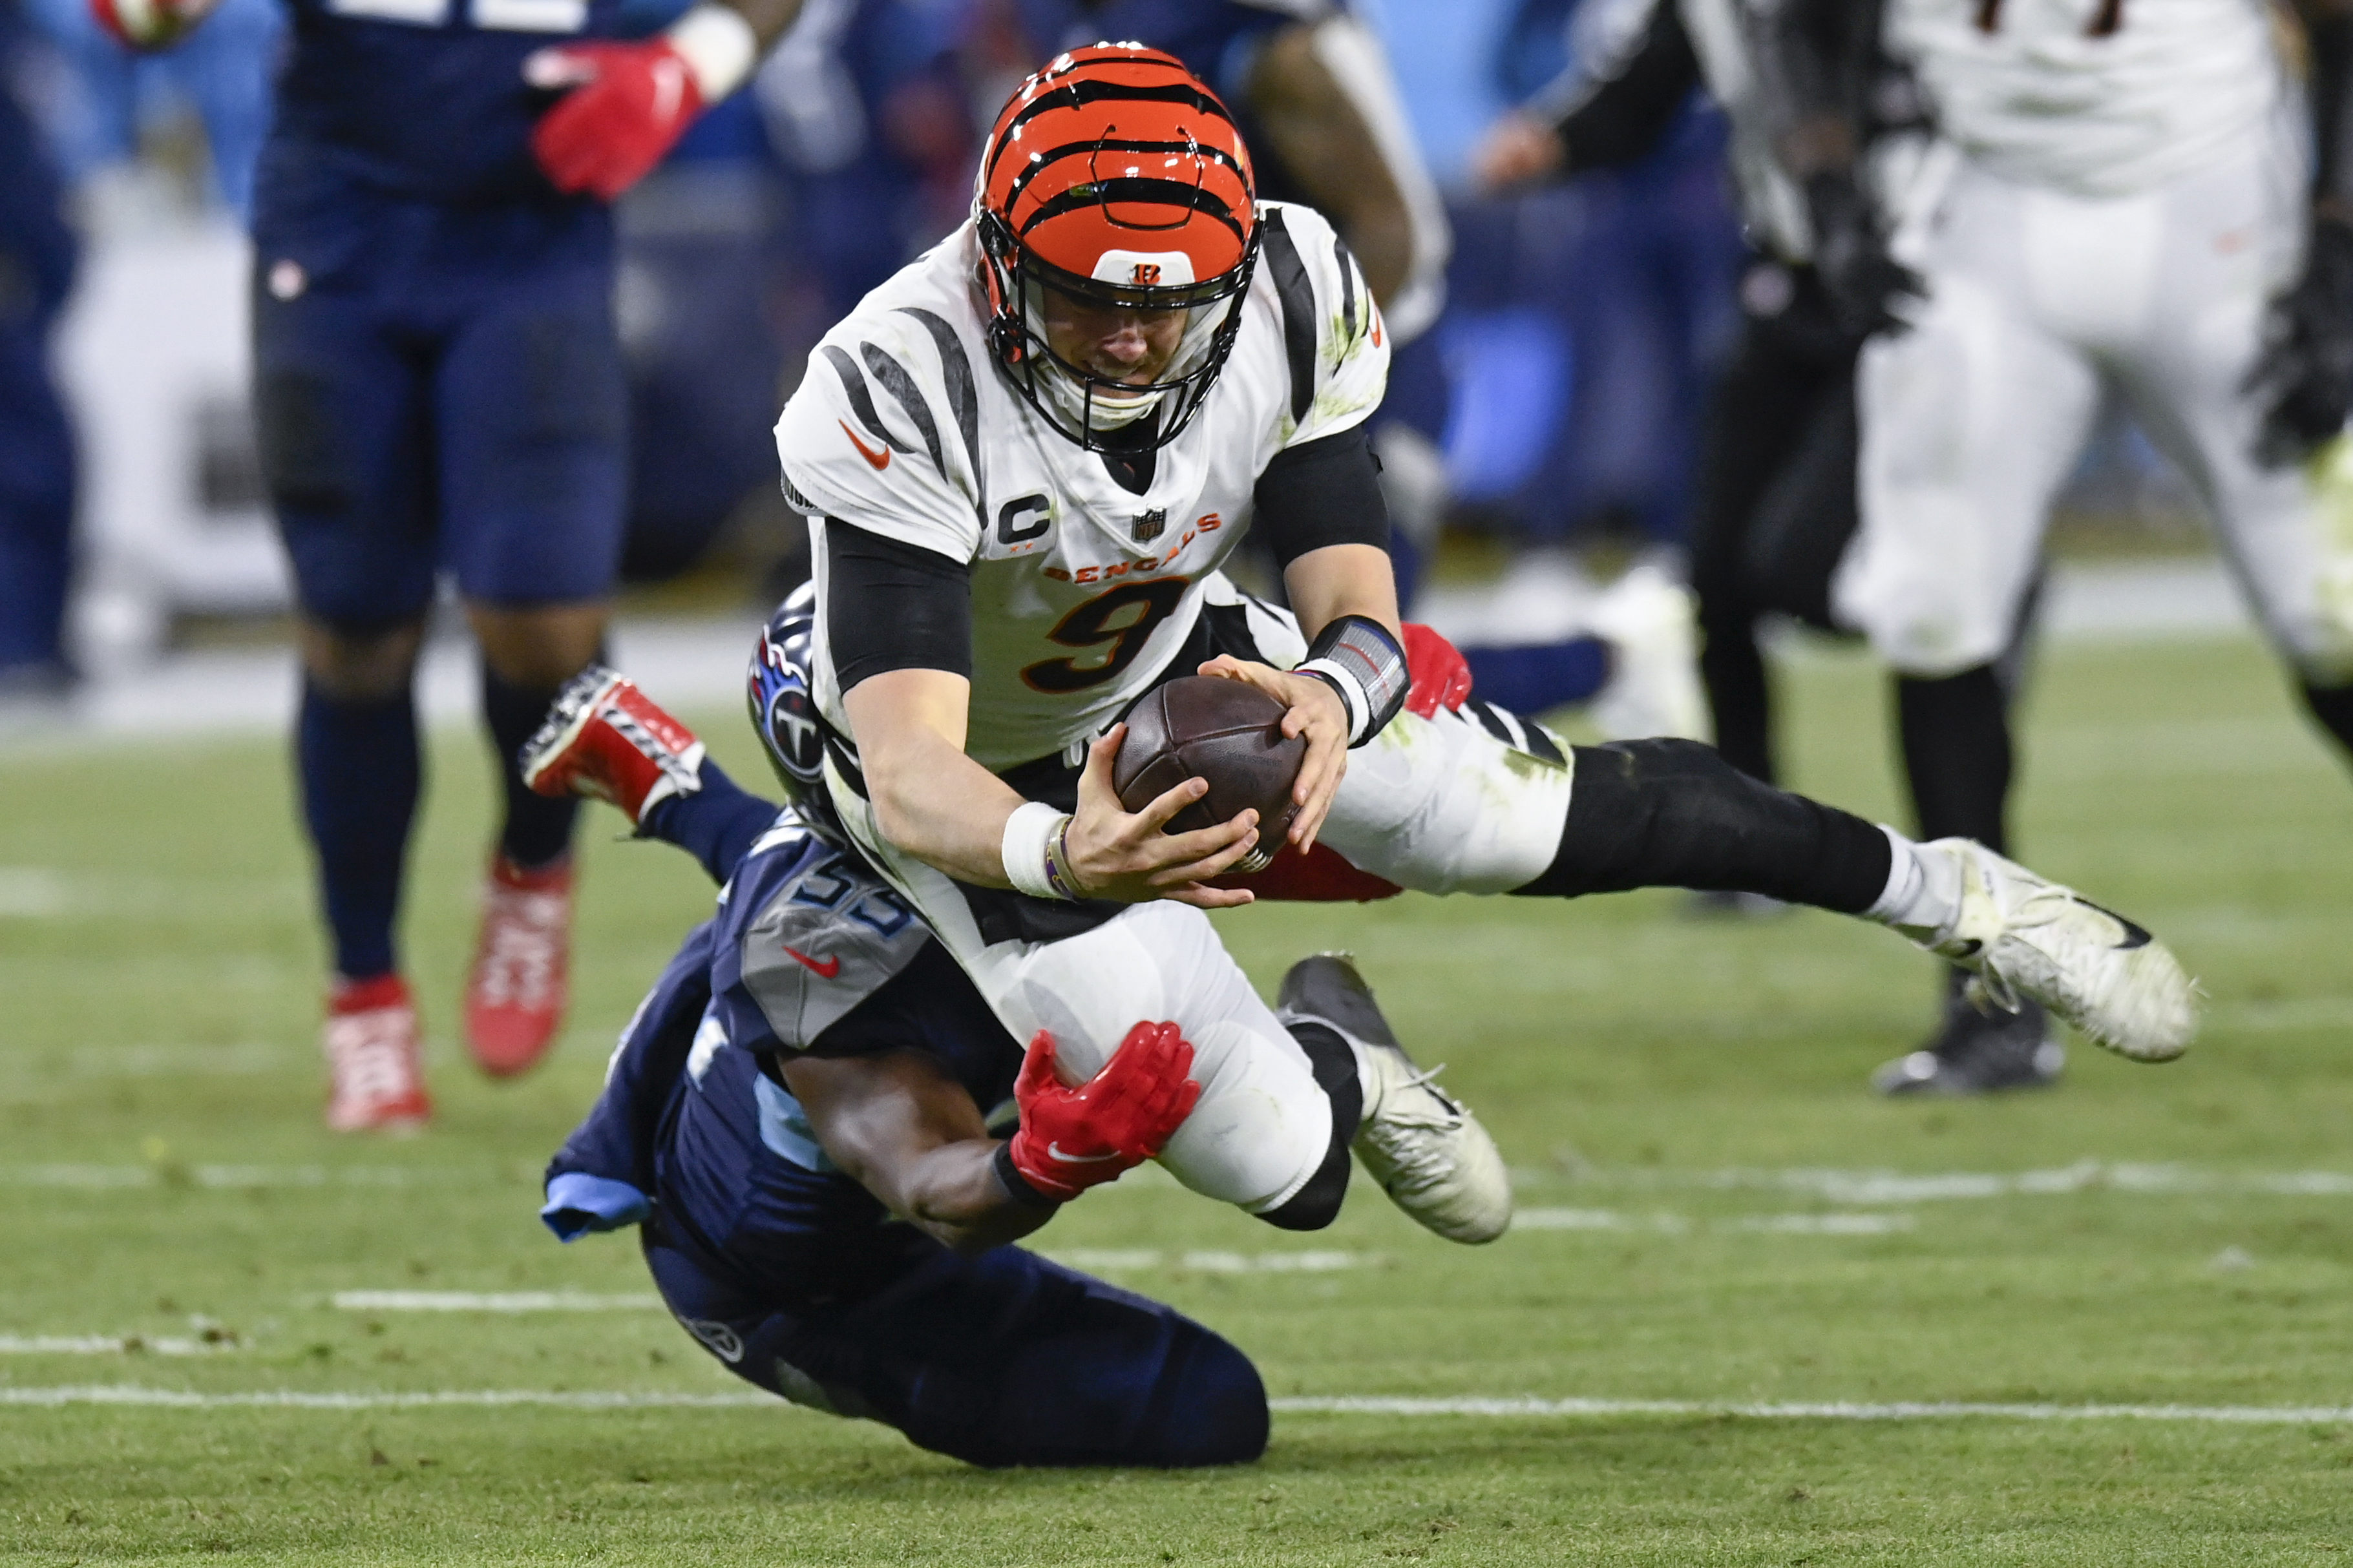 Party like it's 1991: Bengals win playoff game